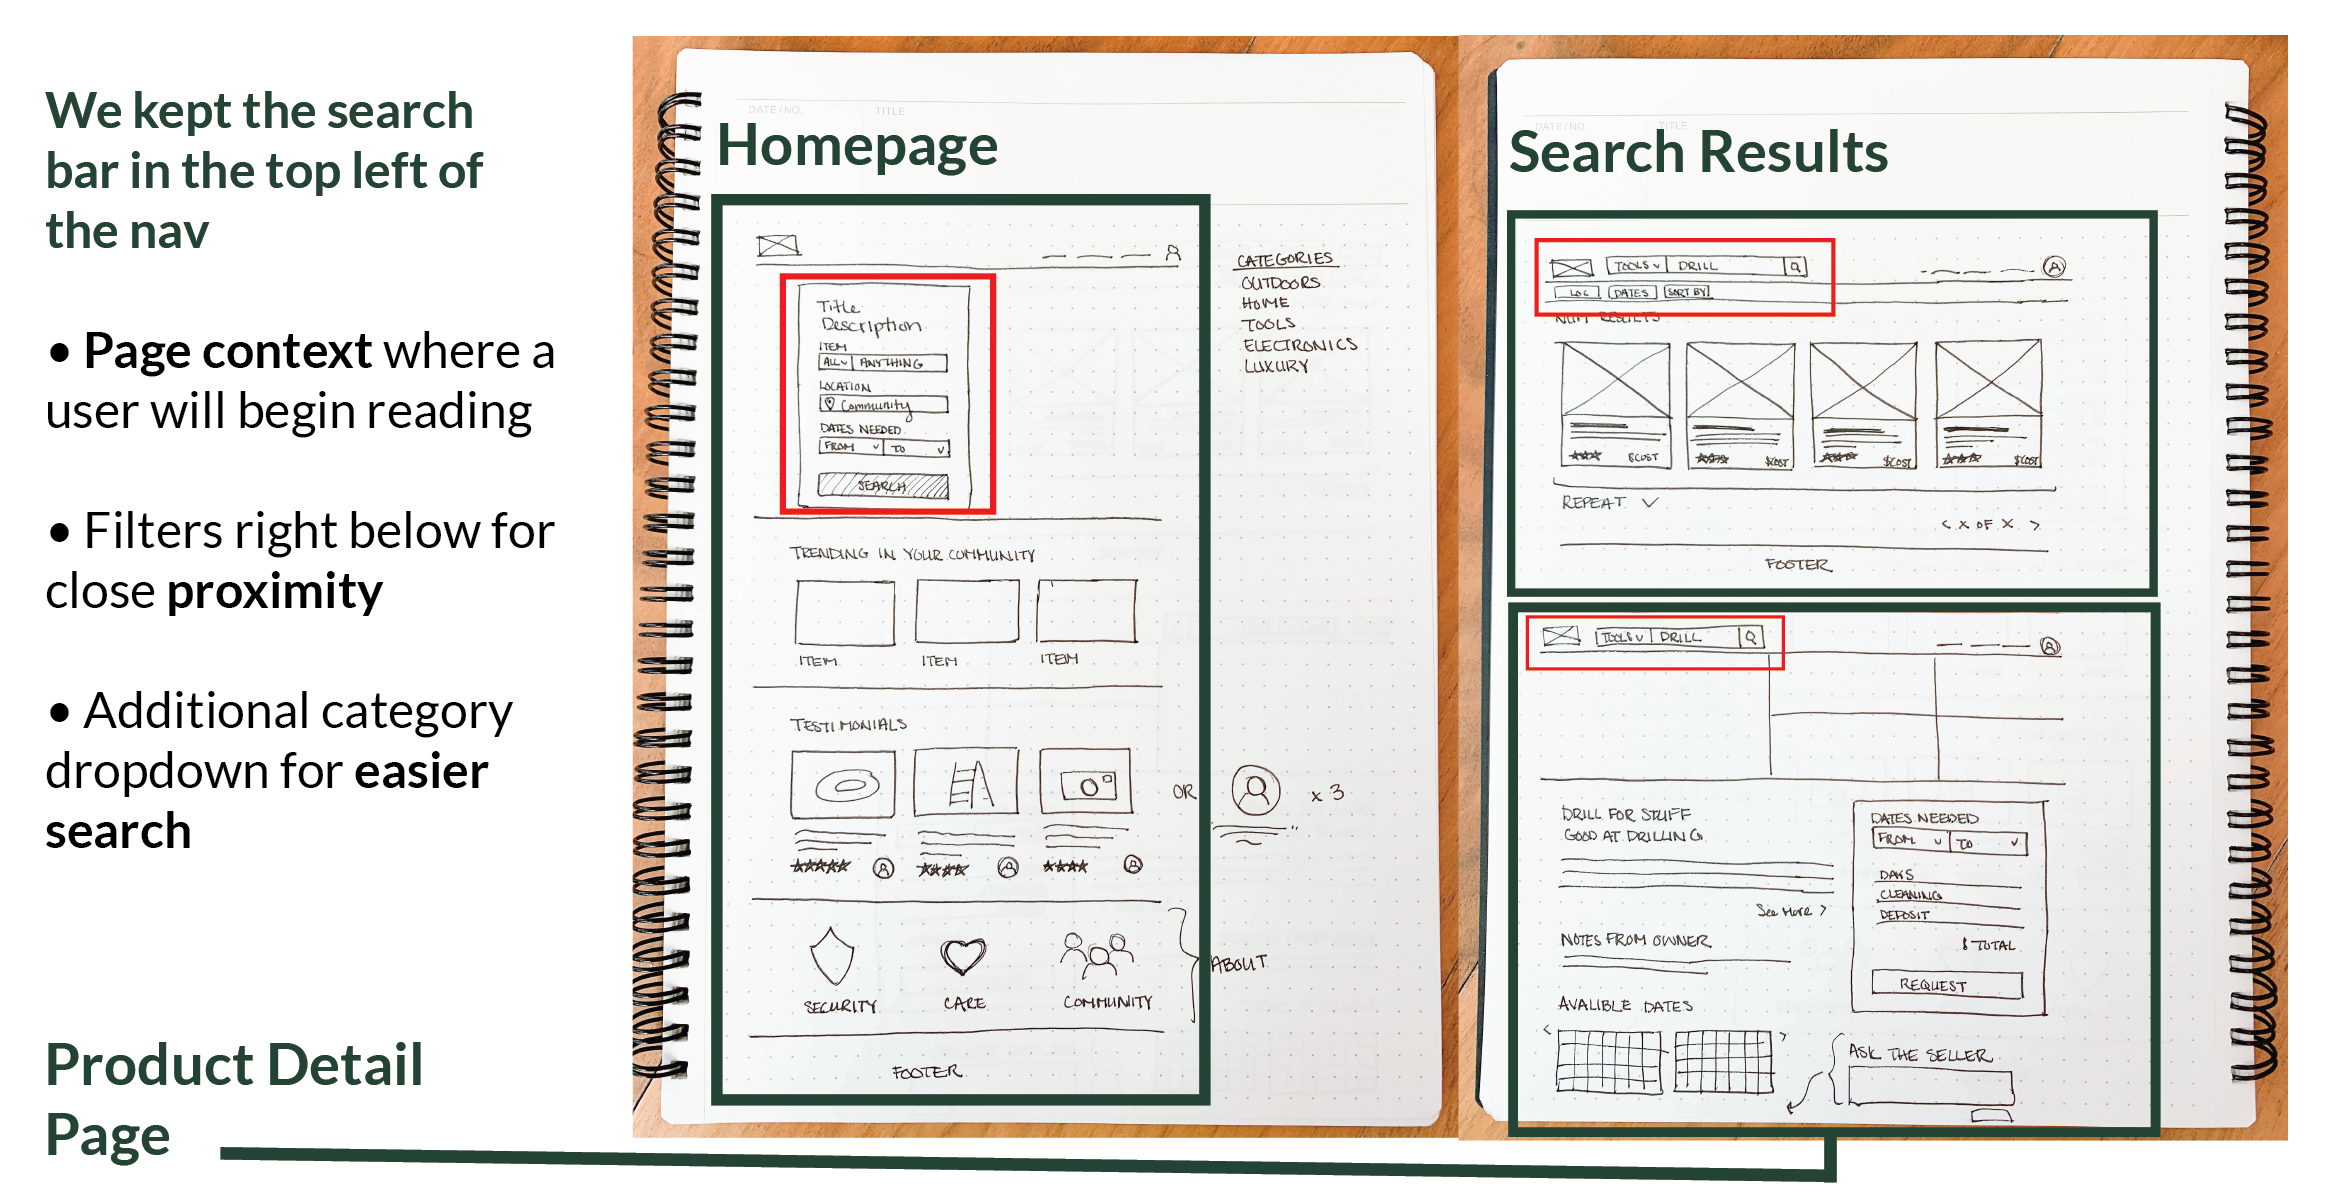 Initial sketches of Trellis: Homepage, Search Results, and Product Detail Page.